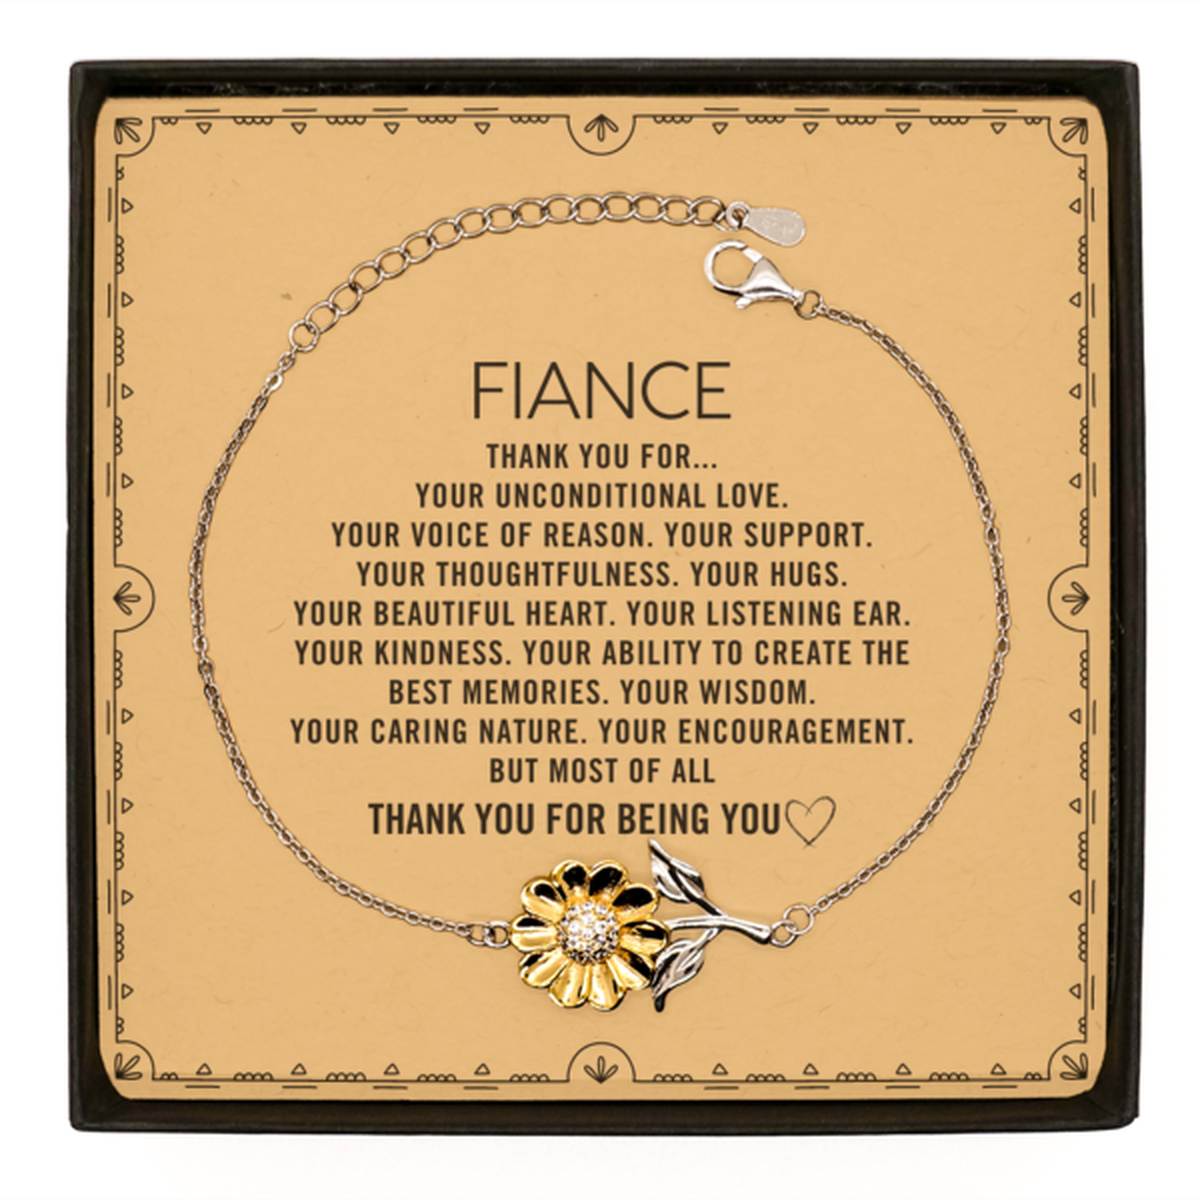 Fiance Sunflower Bracelet Custom, Message Card Gifts For Fiance Christmas Graduation Birthday Gifts for Men Women Fiance Thank you for Your unconditional love